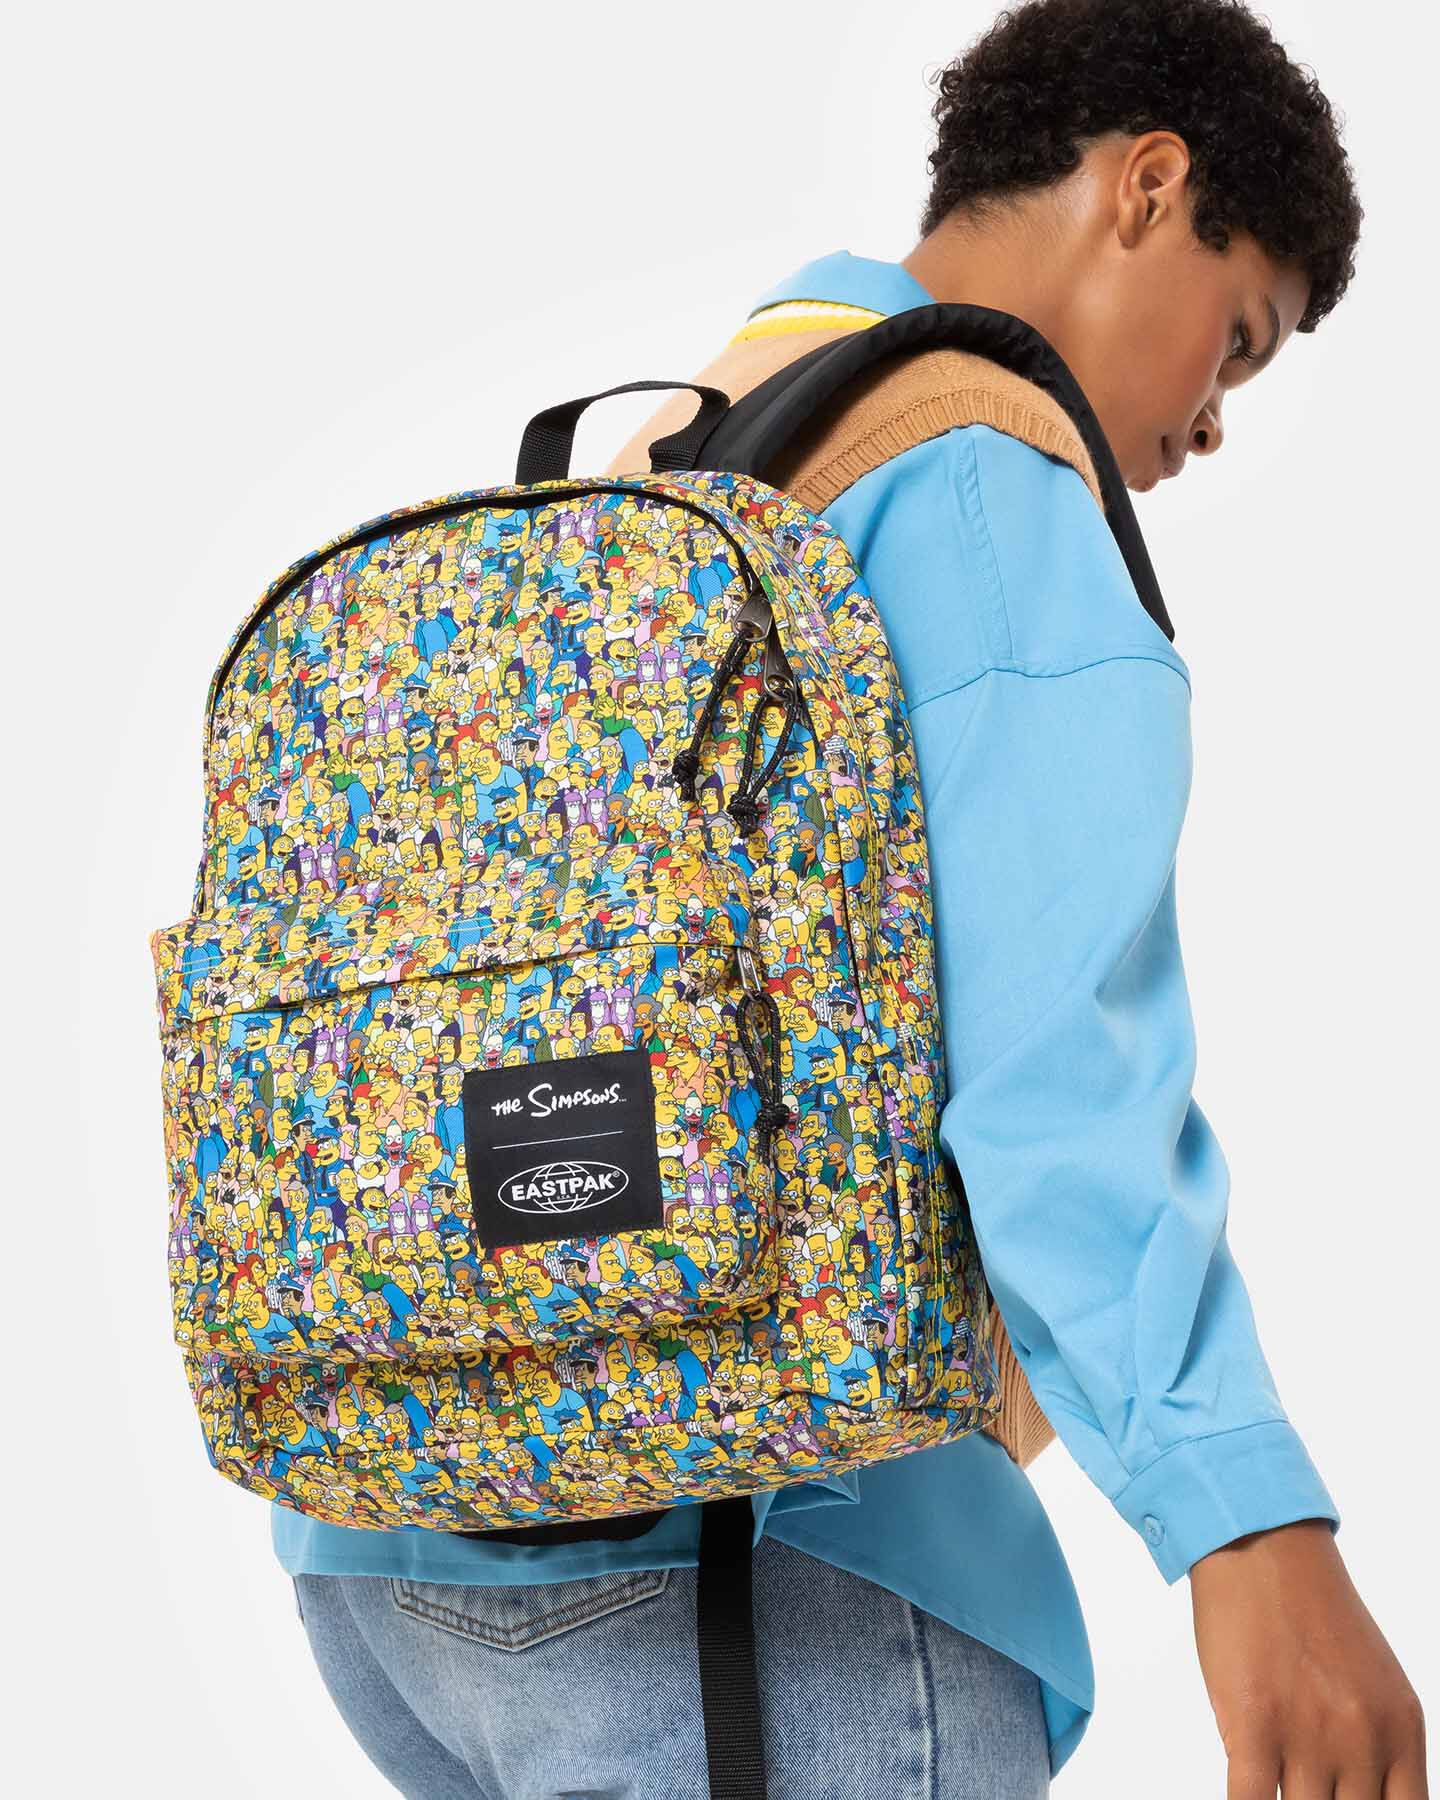  Zaino EASTPAK OUT OF OFFICE THE SIMPSONS  S5550620|7A2|OS scatto 2